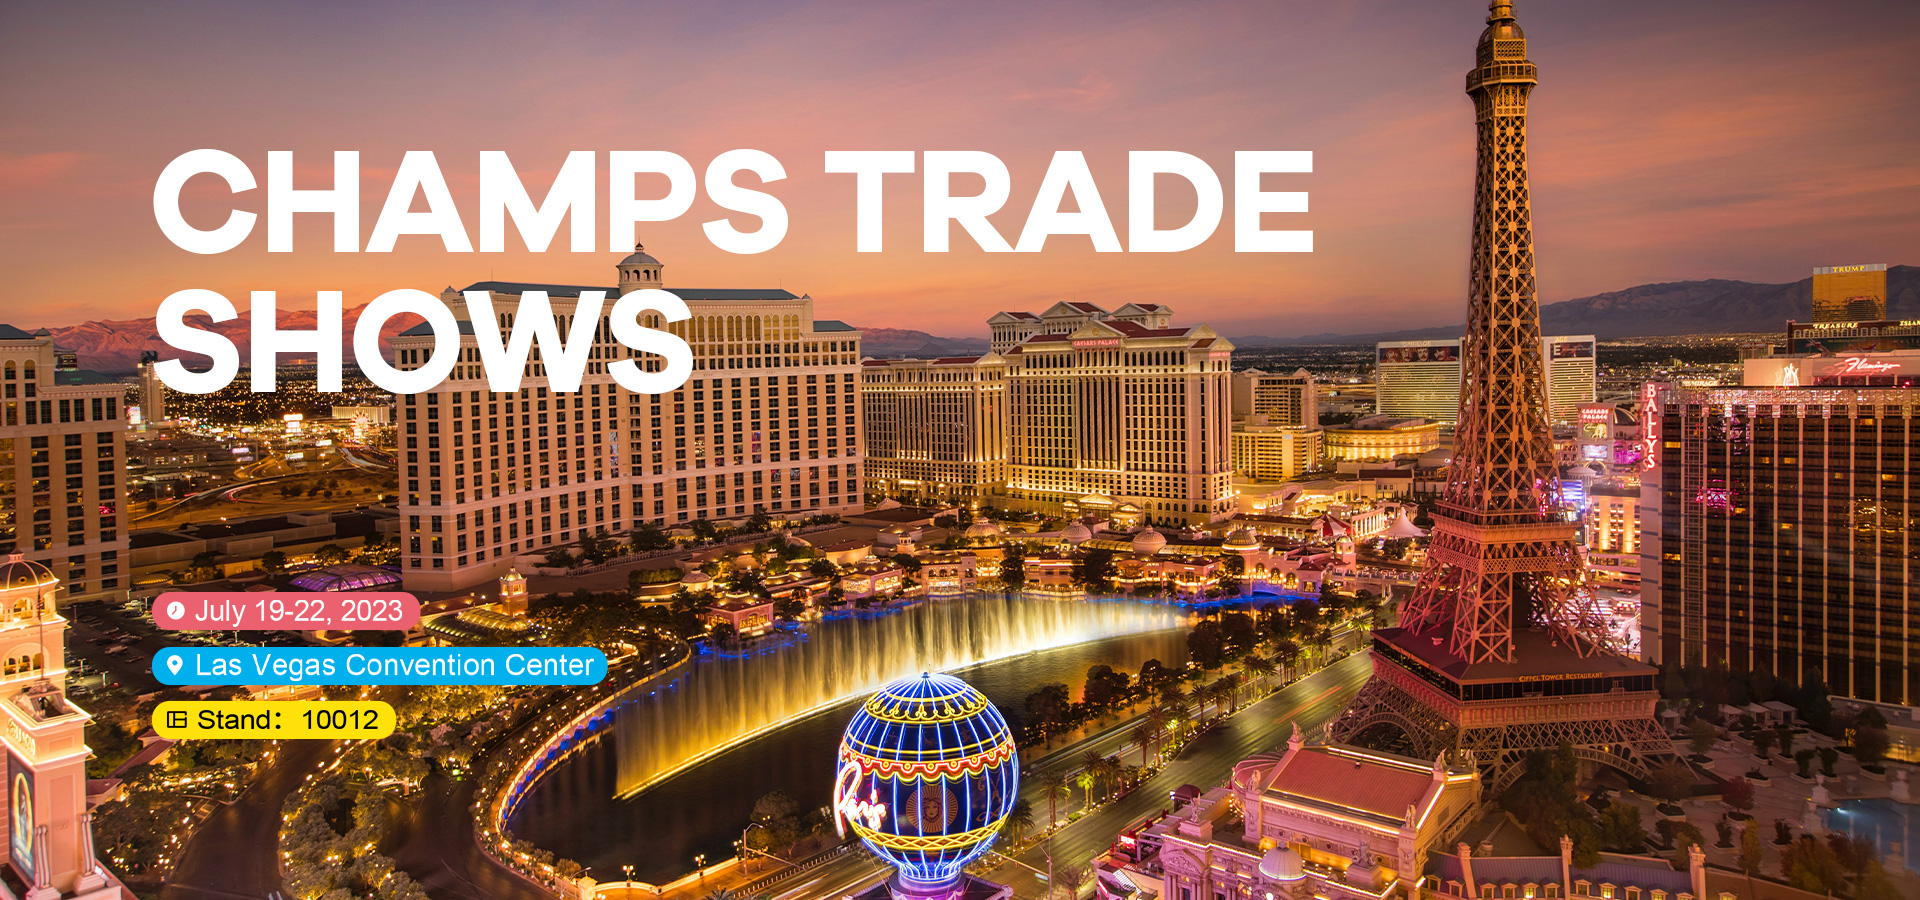 Enjoy ICEWAVE and DRAGBAR new products at Champs Trade Show, July 19-22, Las Vegas插图